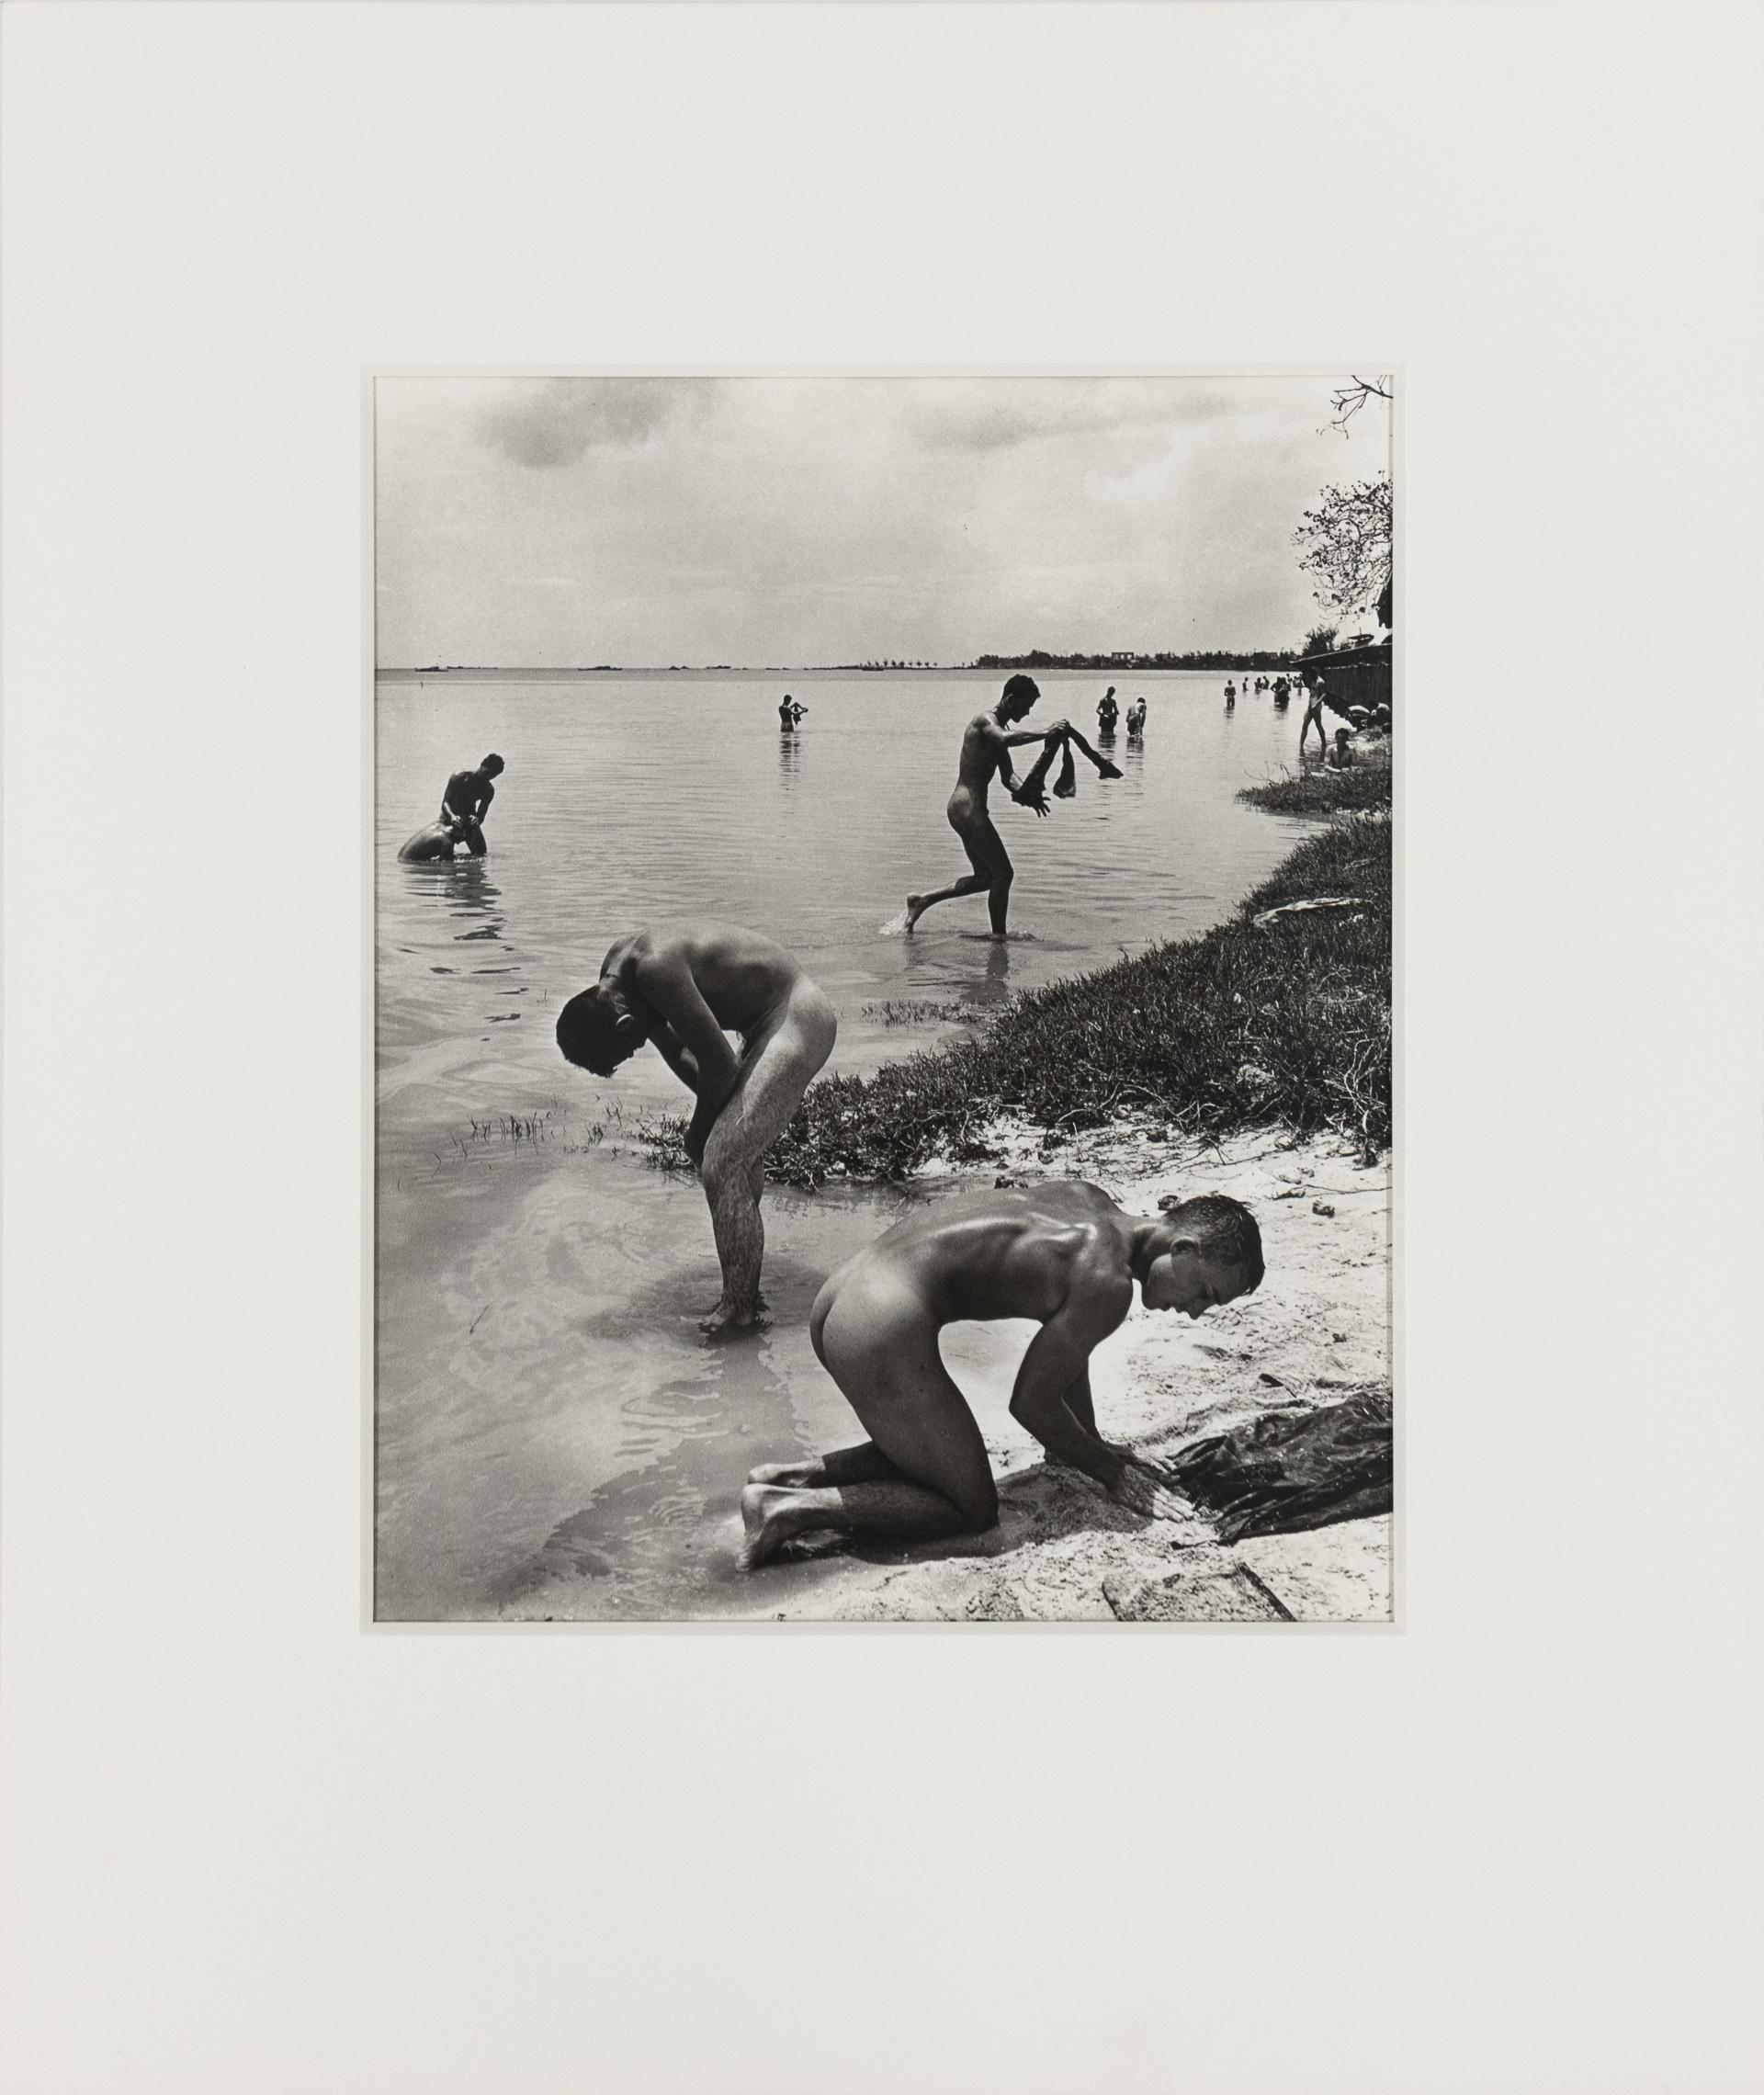 This is a black and white photograph by Peter Stackpole taken in 1944 - this work is offered by CLAMP in New York City.

1944/1970s

Signed in pencil, l.r.; Also signed in pencil, verso

Gelatin silver print 

12.25 x 10 inches (31.1 x 25.4 cm),